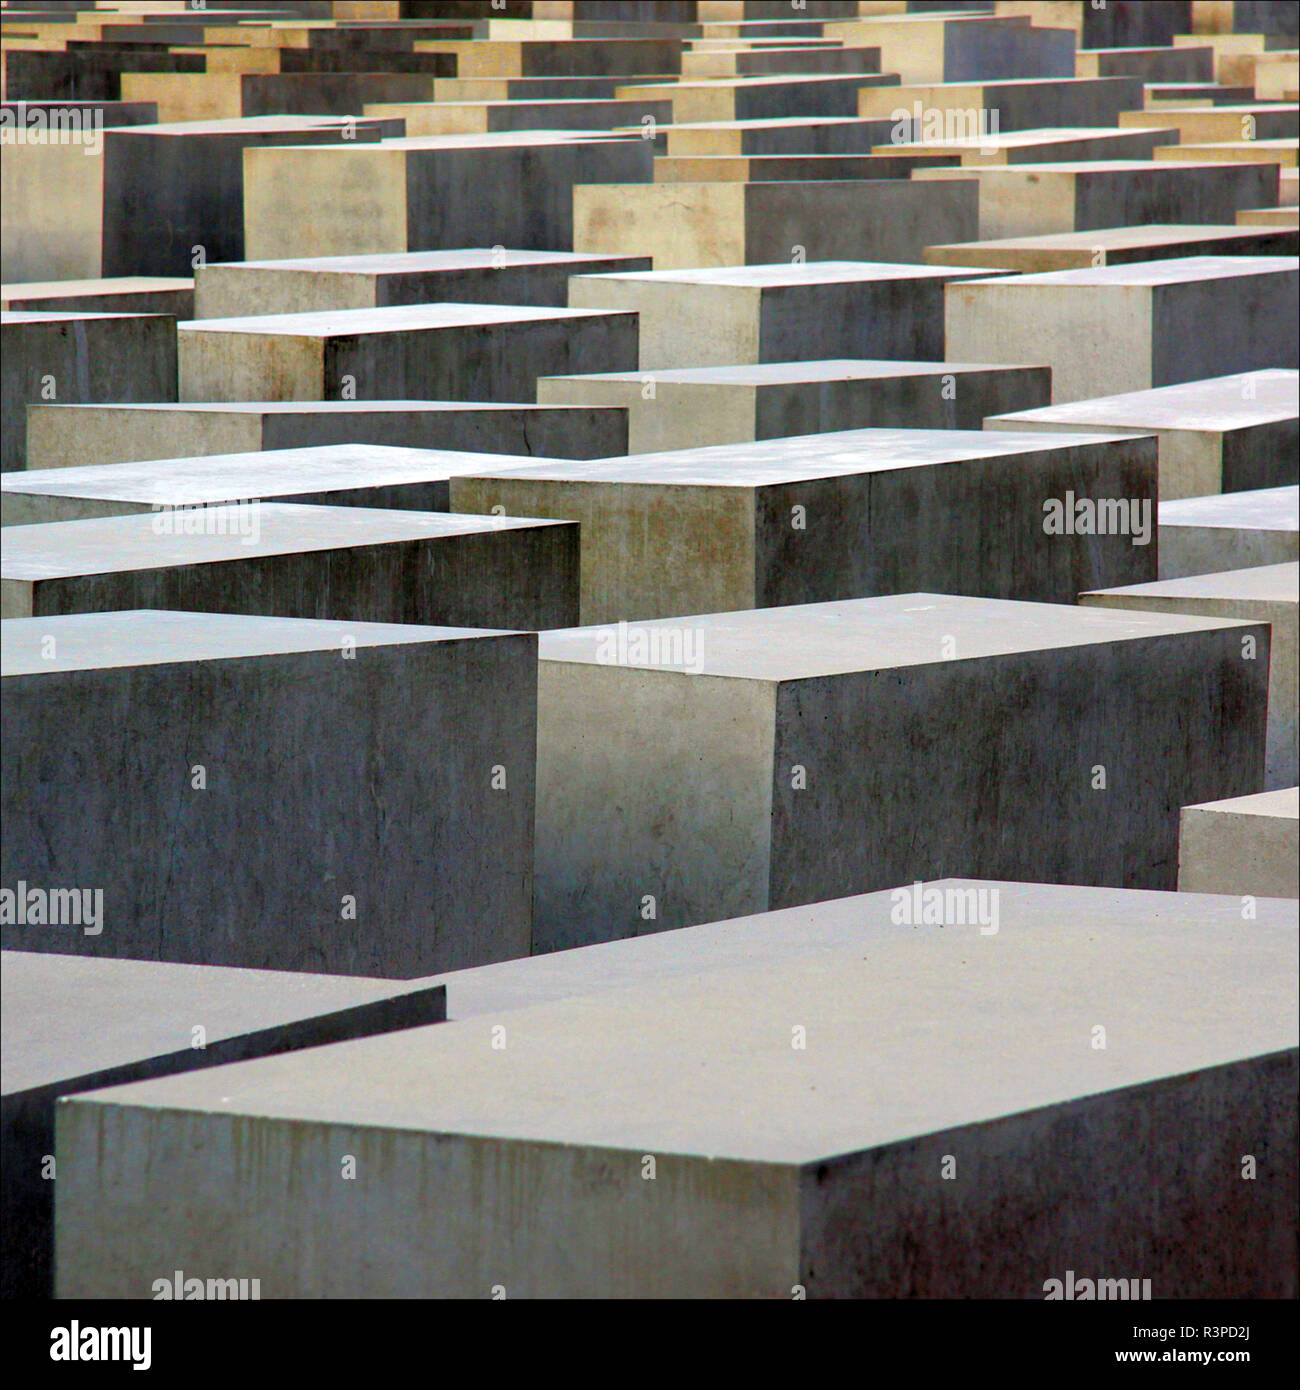 Berlin, Germany. Holocaust Memorial, Memorial to the Murdered Jews of Europe designed by Peter Eisenman near Tiergarten in Mitte (Editorial Use Only) Stock Photo